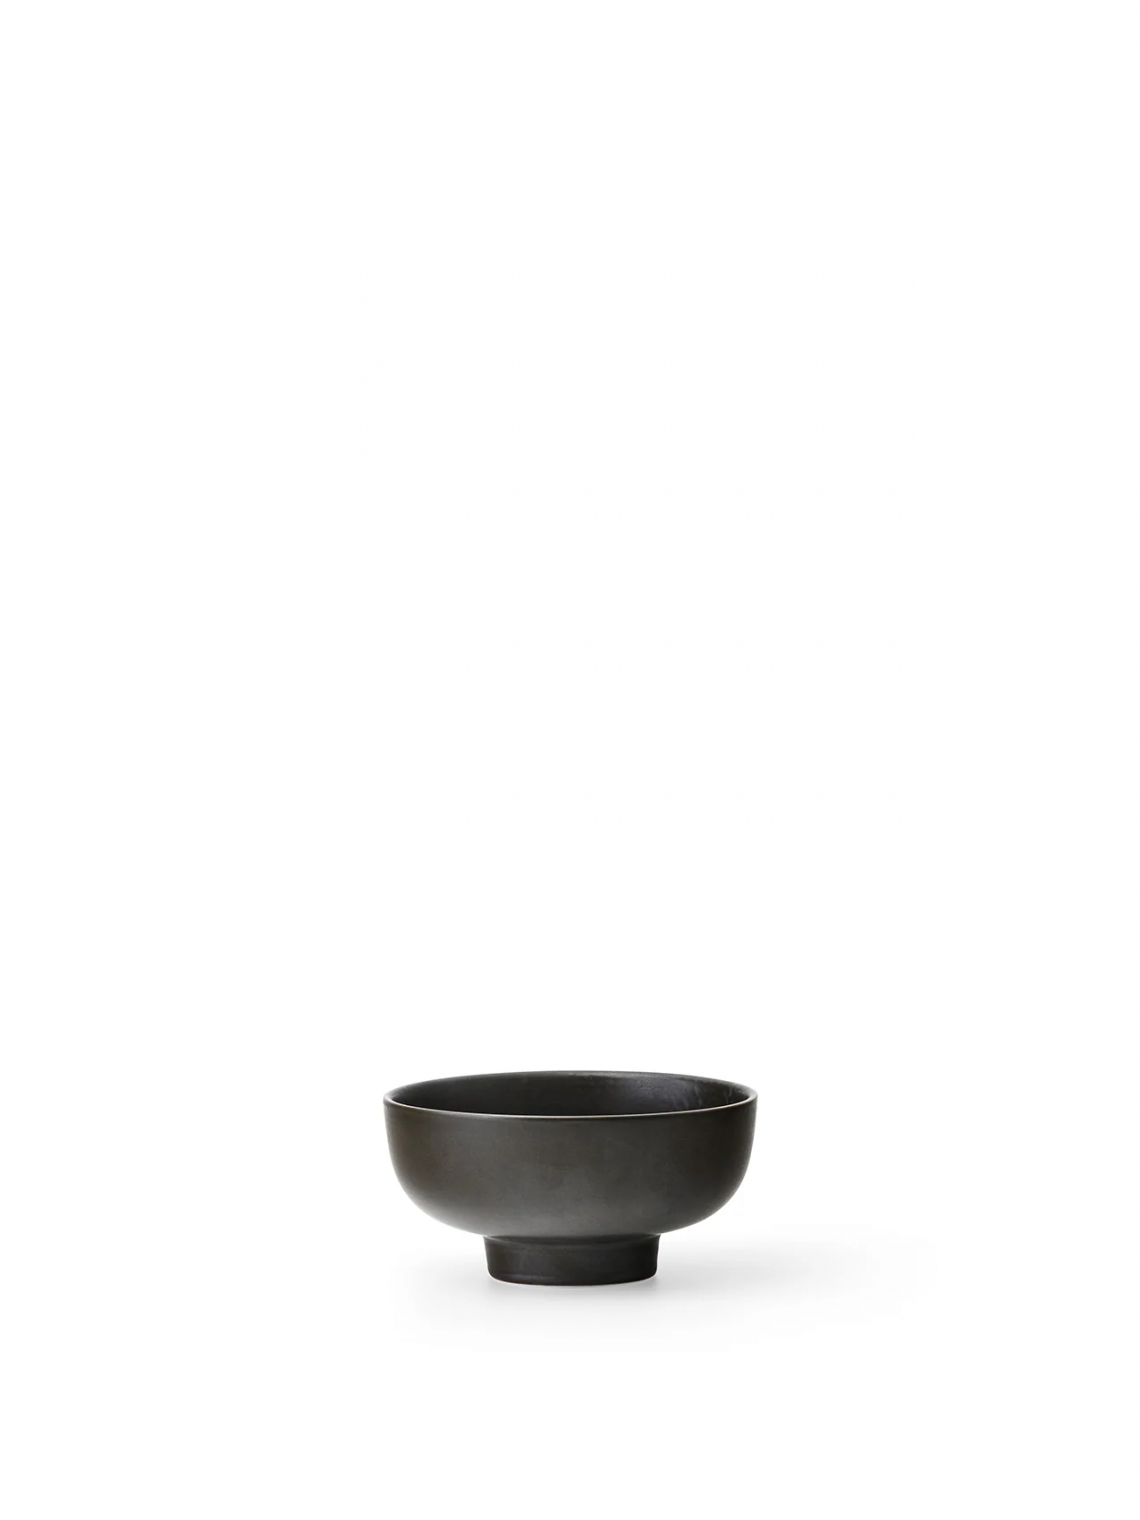 New Norm Footed Bowl碗场景图3